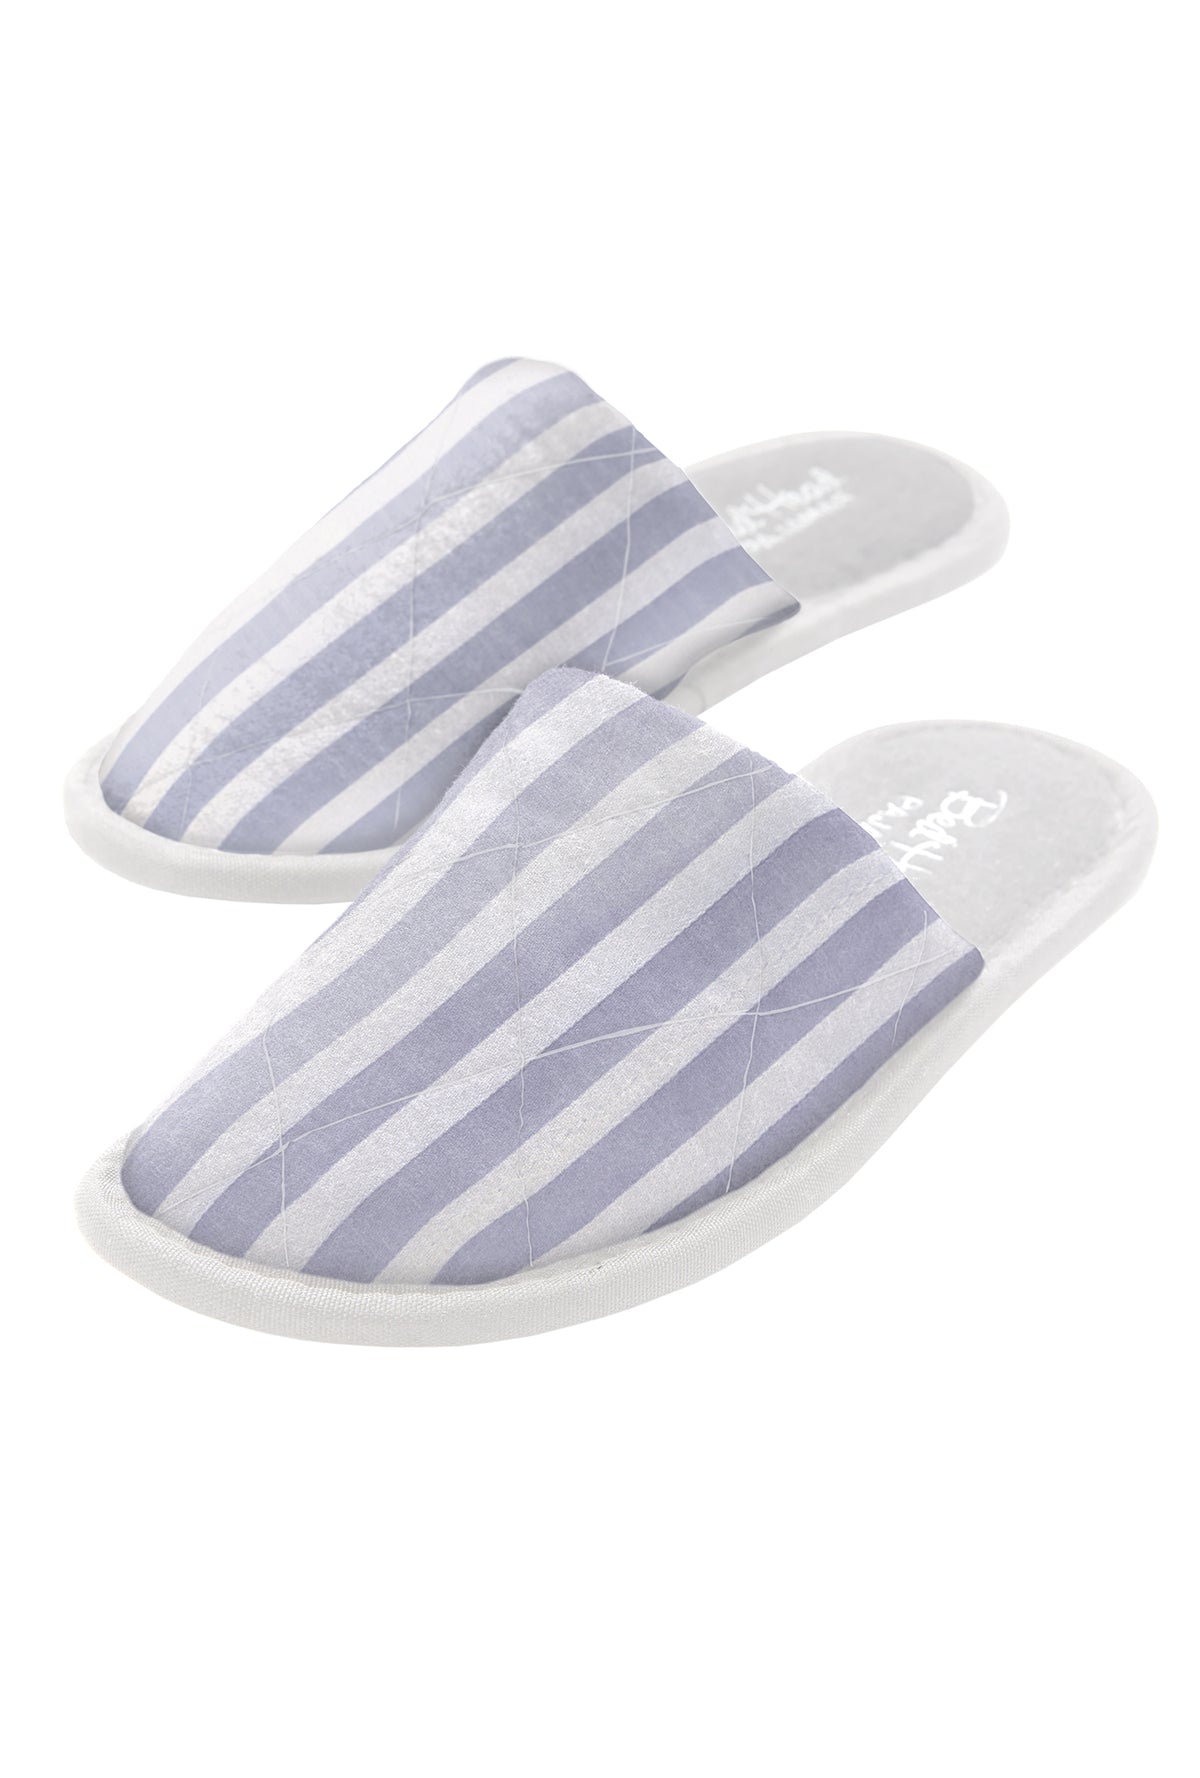 Blue 3D Stripe French Terry Lined Woven Cotton Unisex Slippers